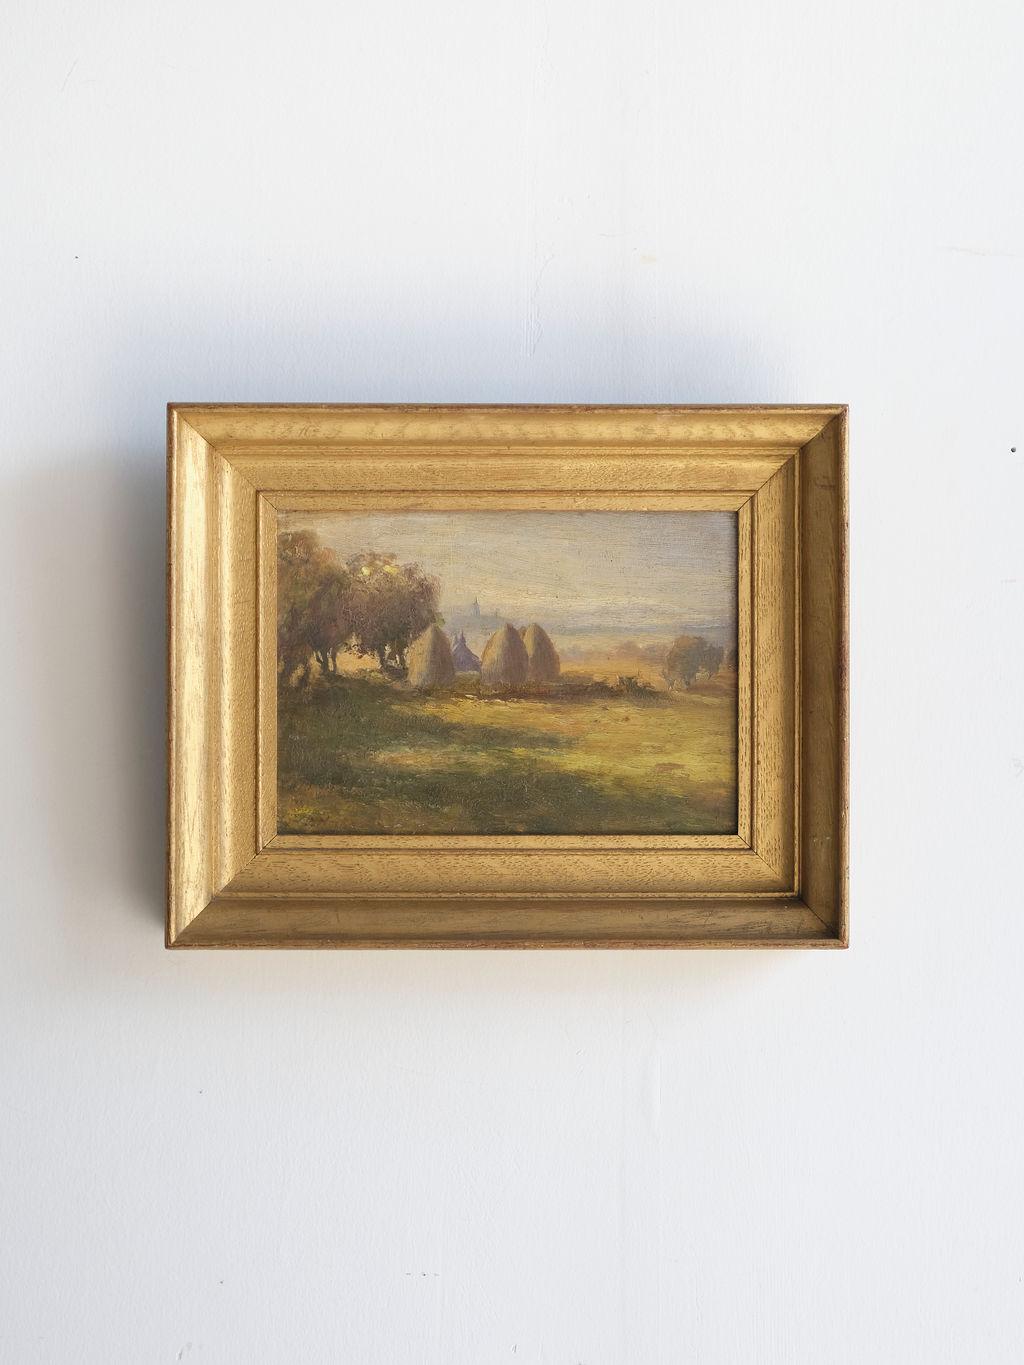 This framed oil painting of an English countryside would make a stunning addition to any room. The dull greens and blues of this painting make for a calm and soothing accent piece. The gold frame is about 1.5 to 2 inches thick and really adds